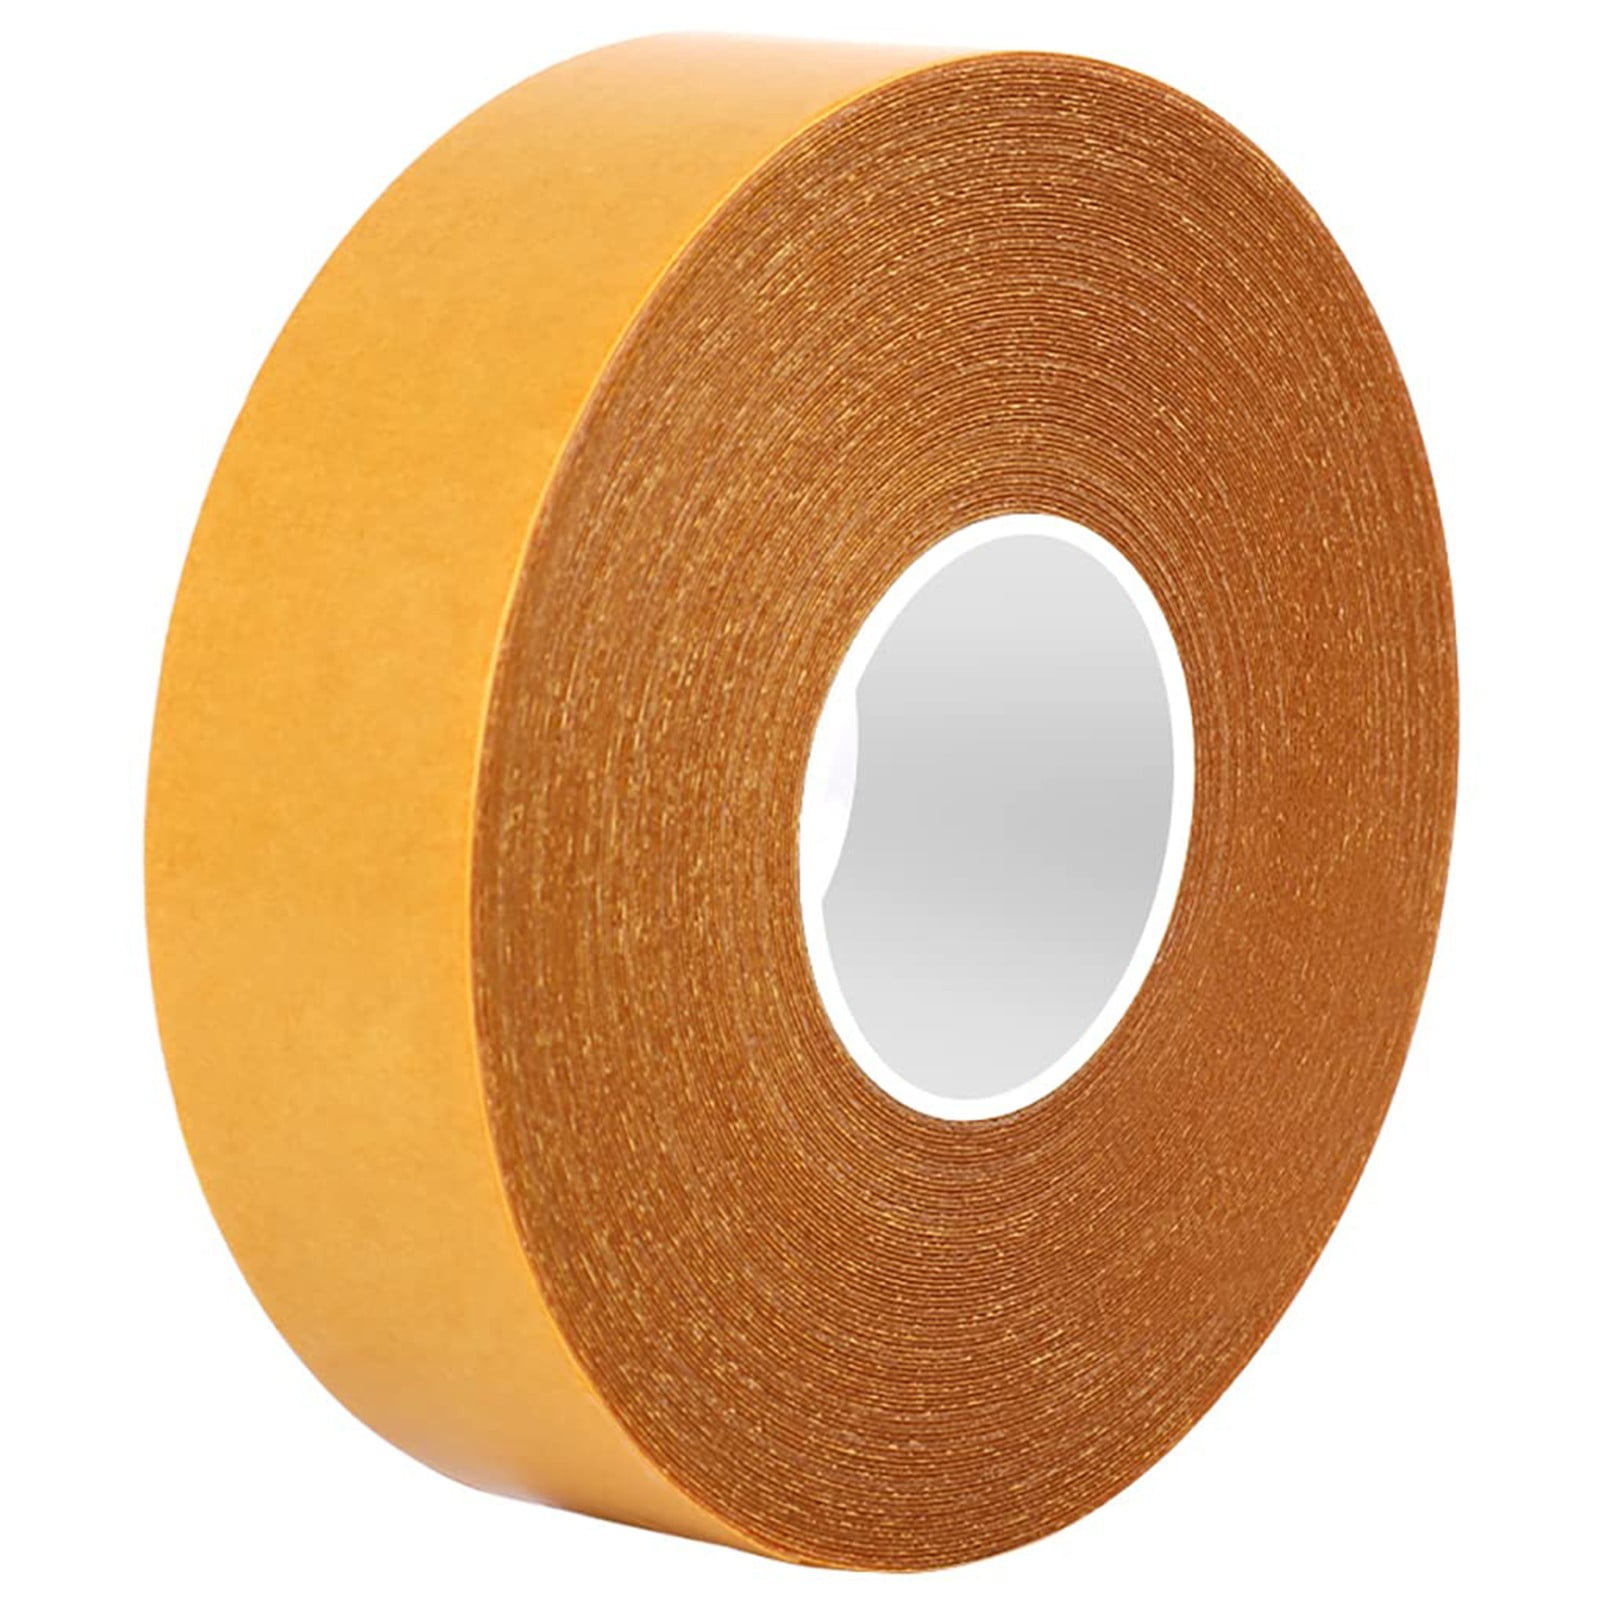 WENSSKKU Extra Strong Double Sided Fabric Tape Heavy Duty for  Clothes,Double Stick Fabric Tape for Carpet/Clothing 1inch x 33FT(10m) High  Stickness